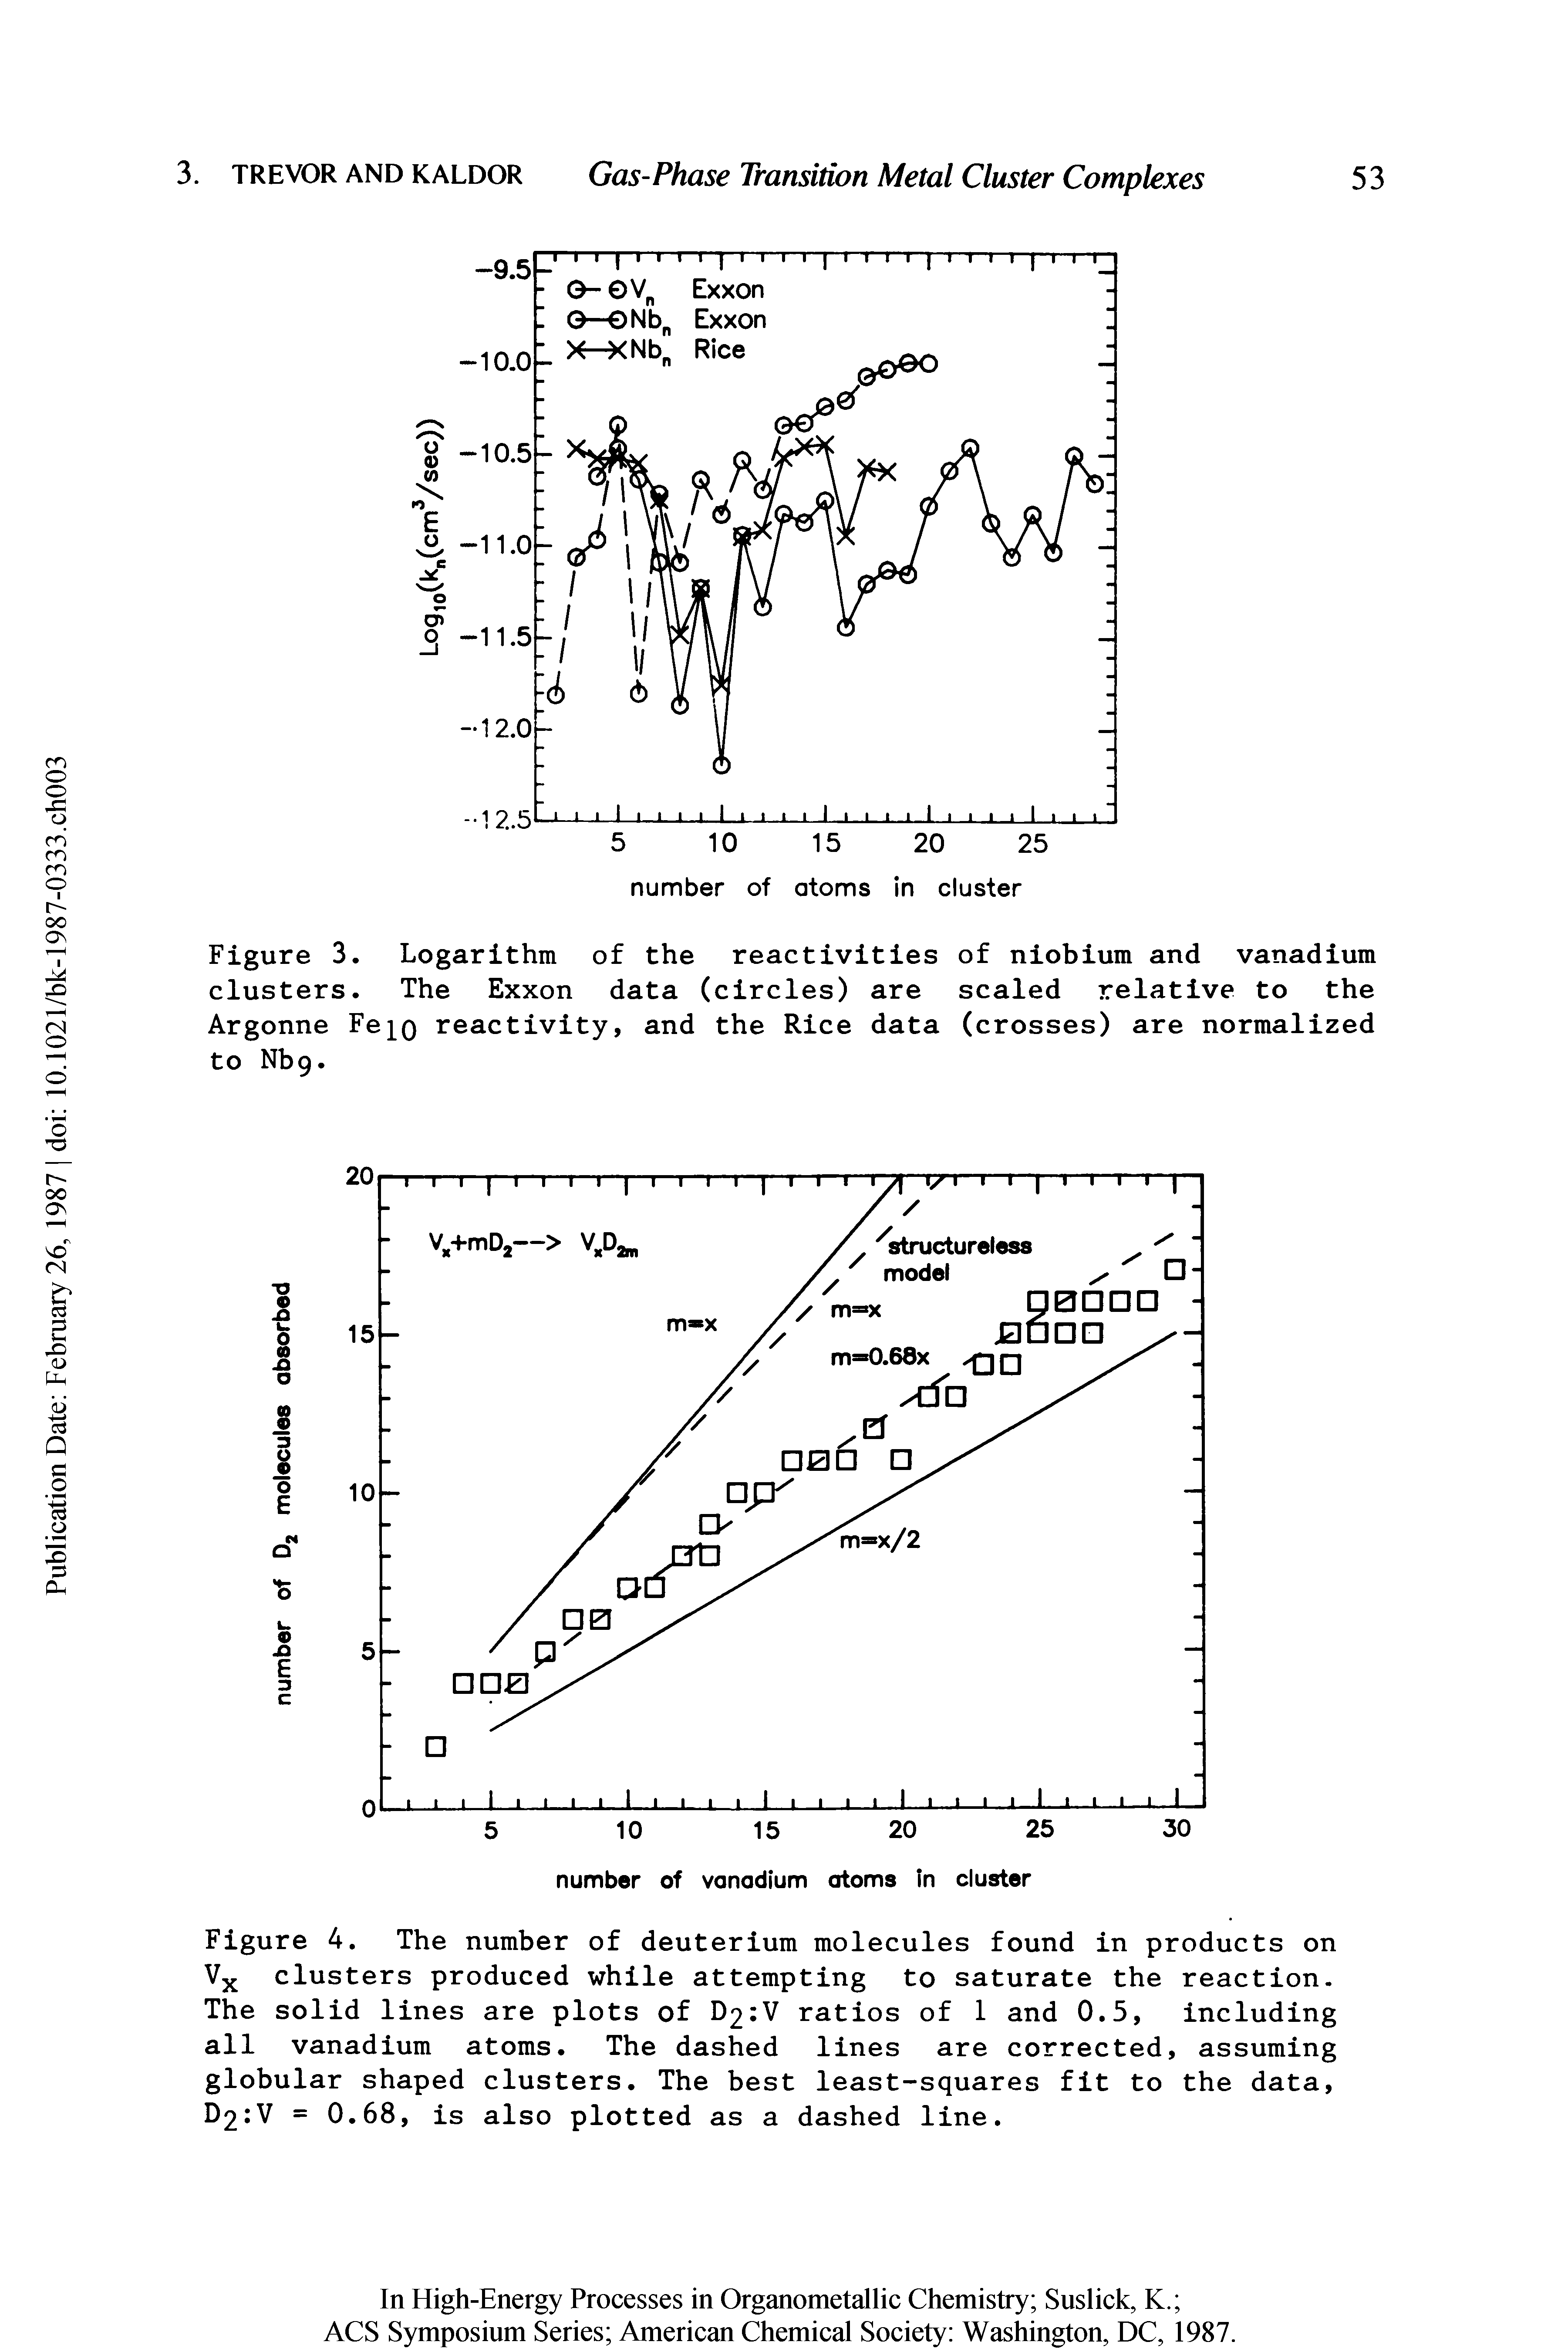 Figure 3. Logarithm of the reactivities of niobium and vanadium clusters. The Exxon data (circles) are scaled relative to the Argonne Fe o reactivity, and the Rice data (crosses) are normalized to Nbg.